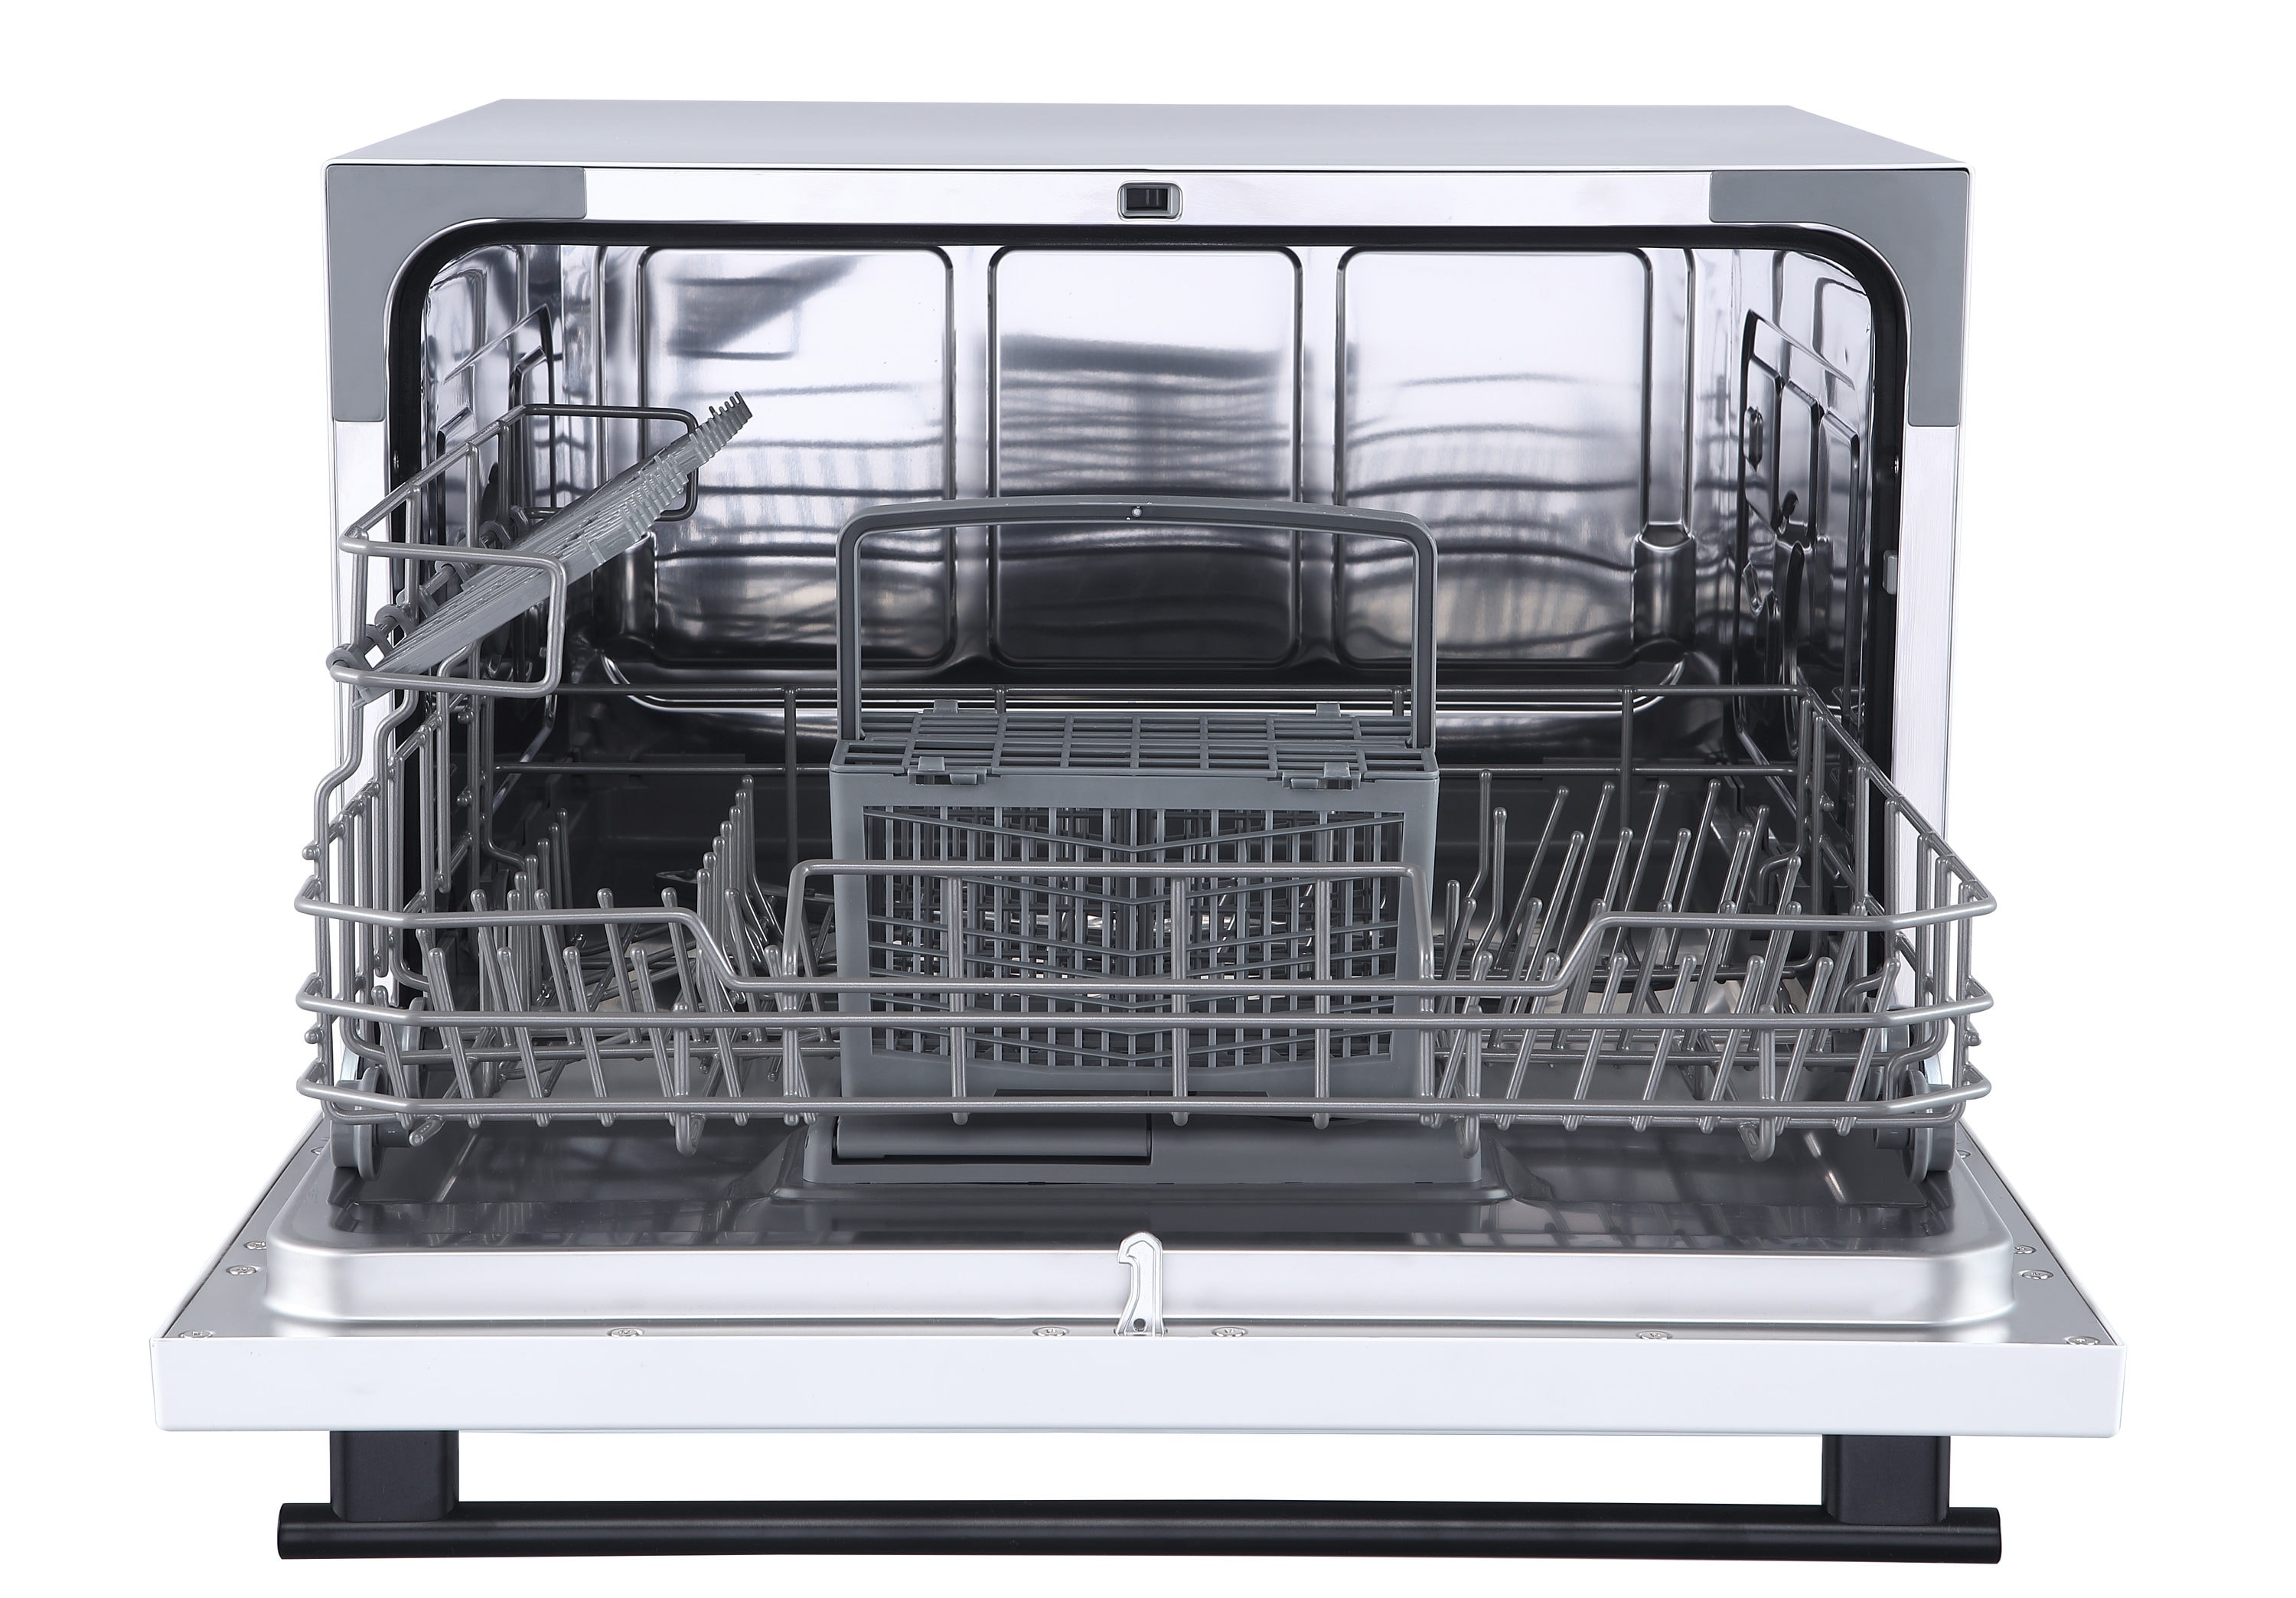 Farberware Professional FCD06ABBWHA Compact Portable Countertop Dishwasher with 6 Place Settings and Silverware Basket, LED Display, Energy Star